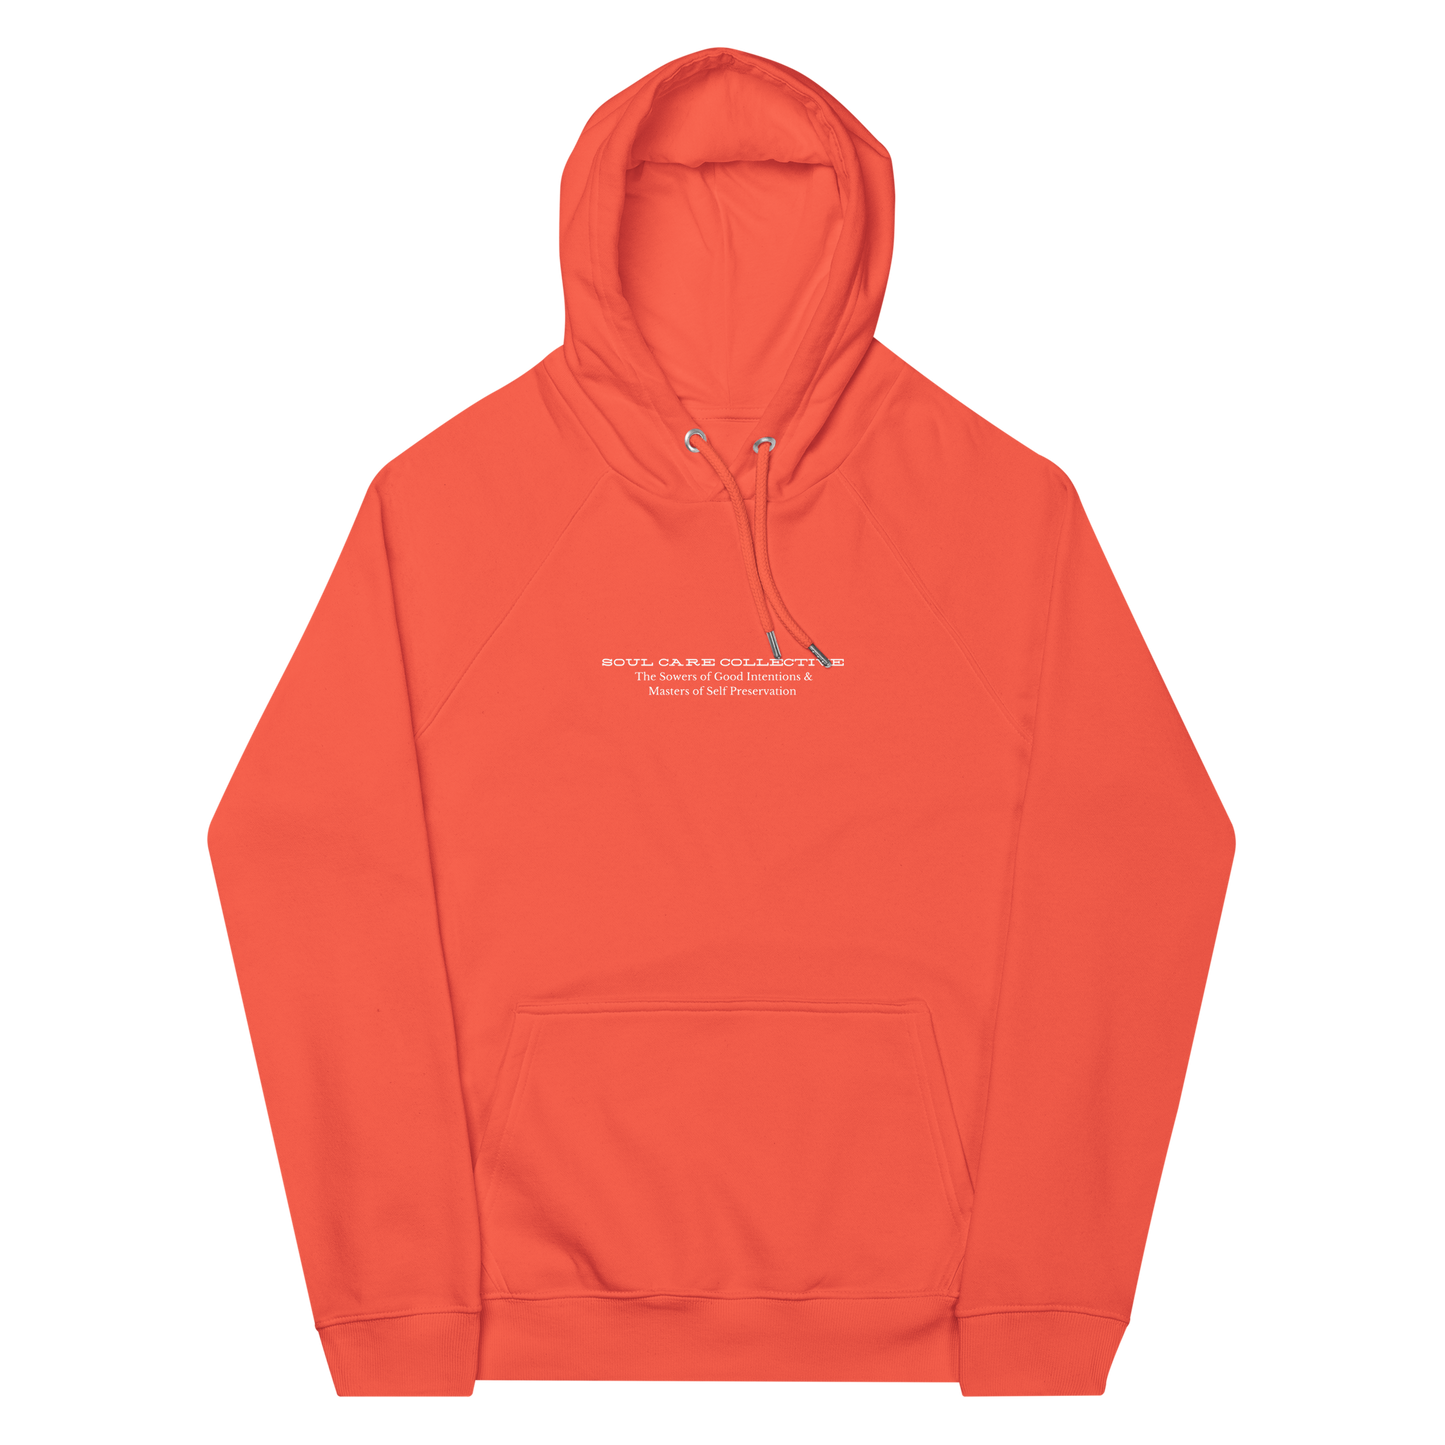 Soul Care Collective Hoodie